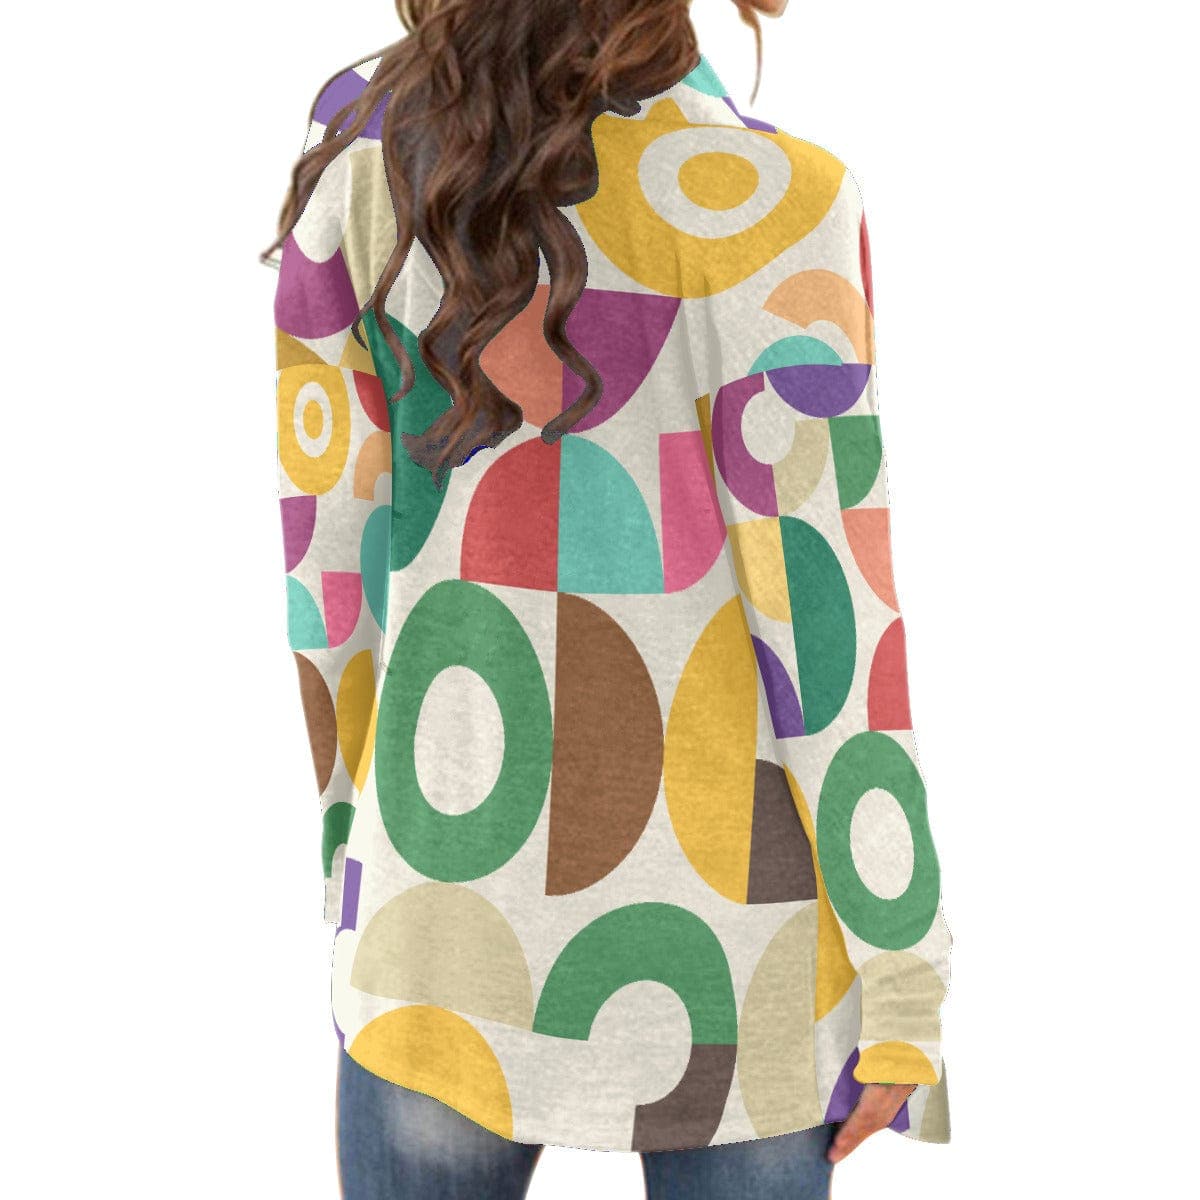 Women's Vintage Colorfull Seventies Print Jersey Cardigan With Long Sleeve by Sensus Design